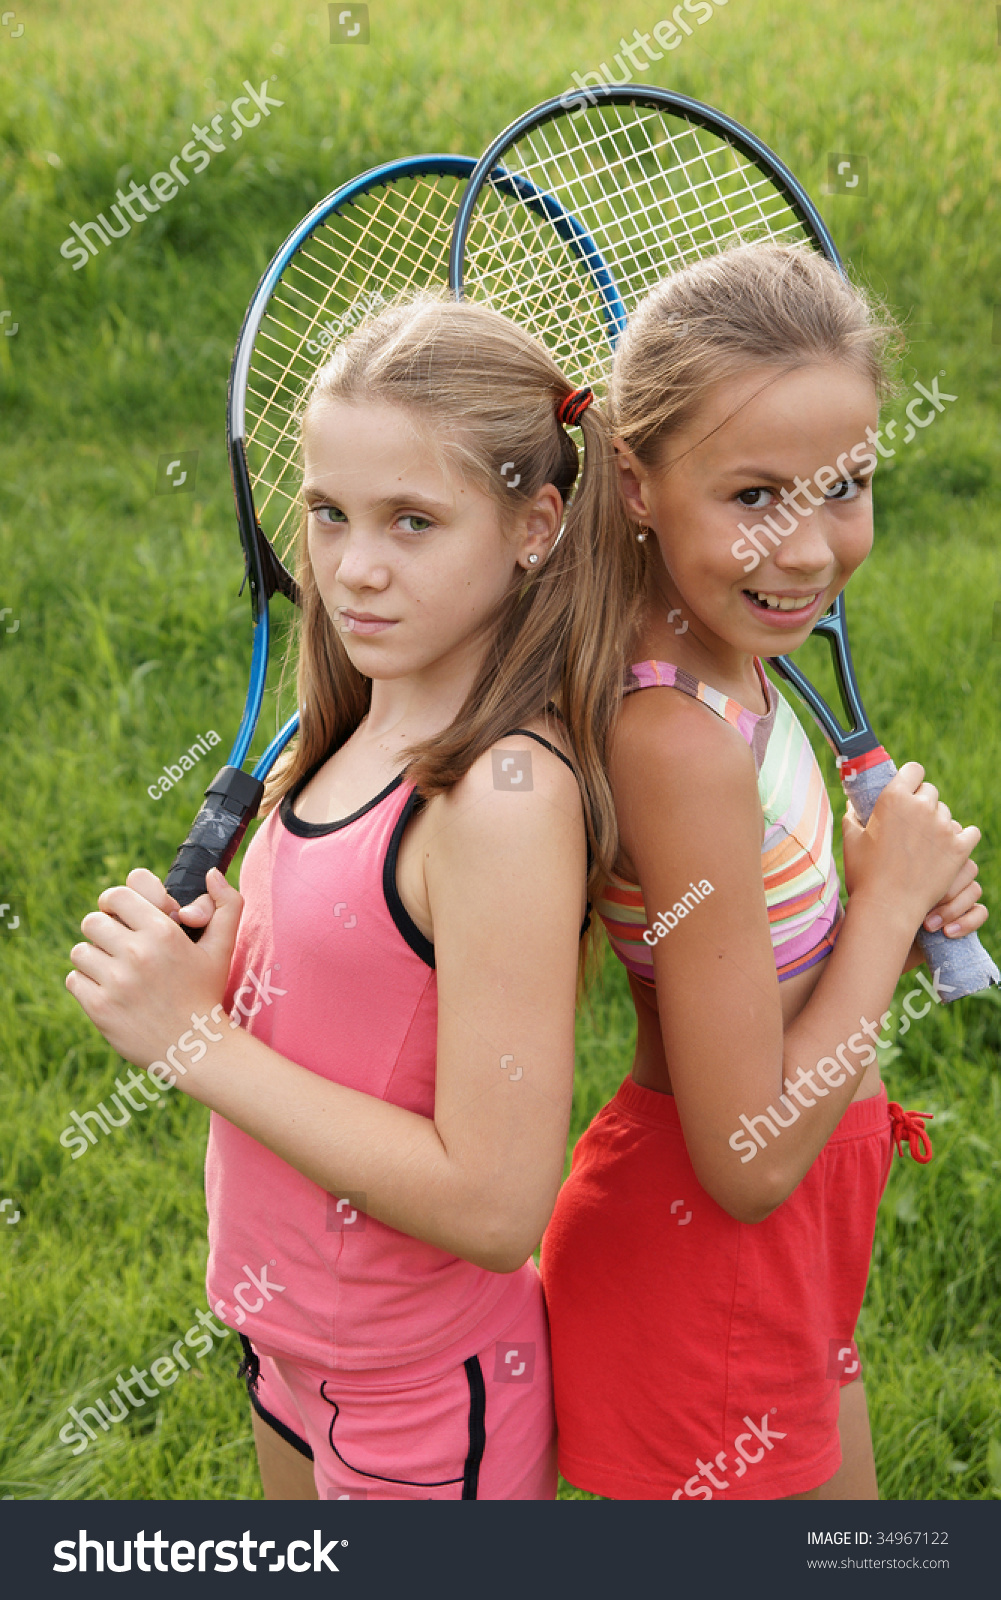 Happy Preteen Girl Sport Outfits Tennis Stock Photo 